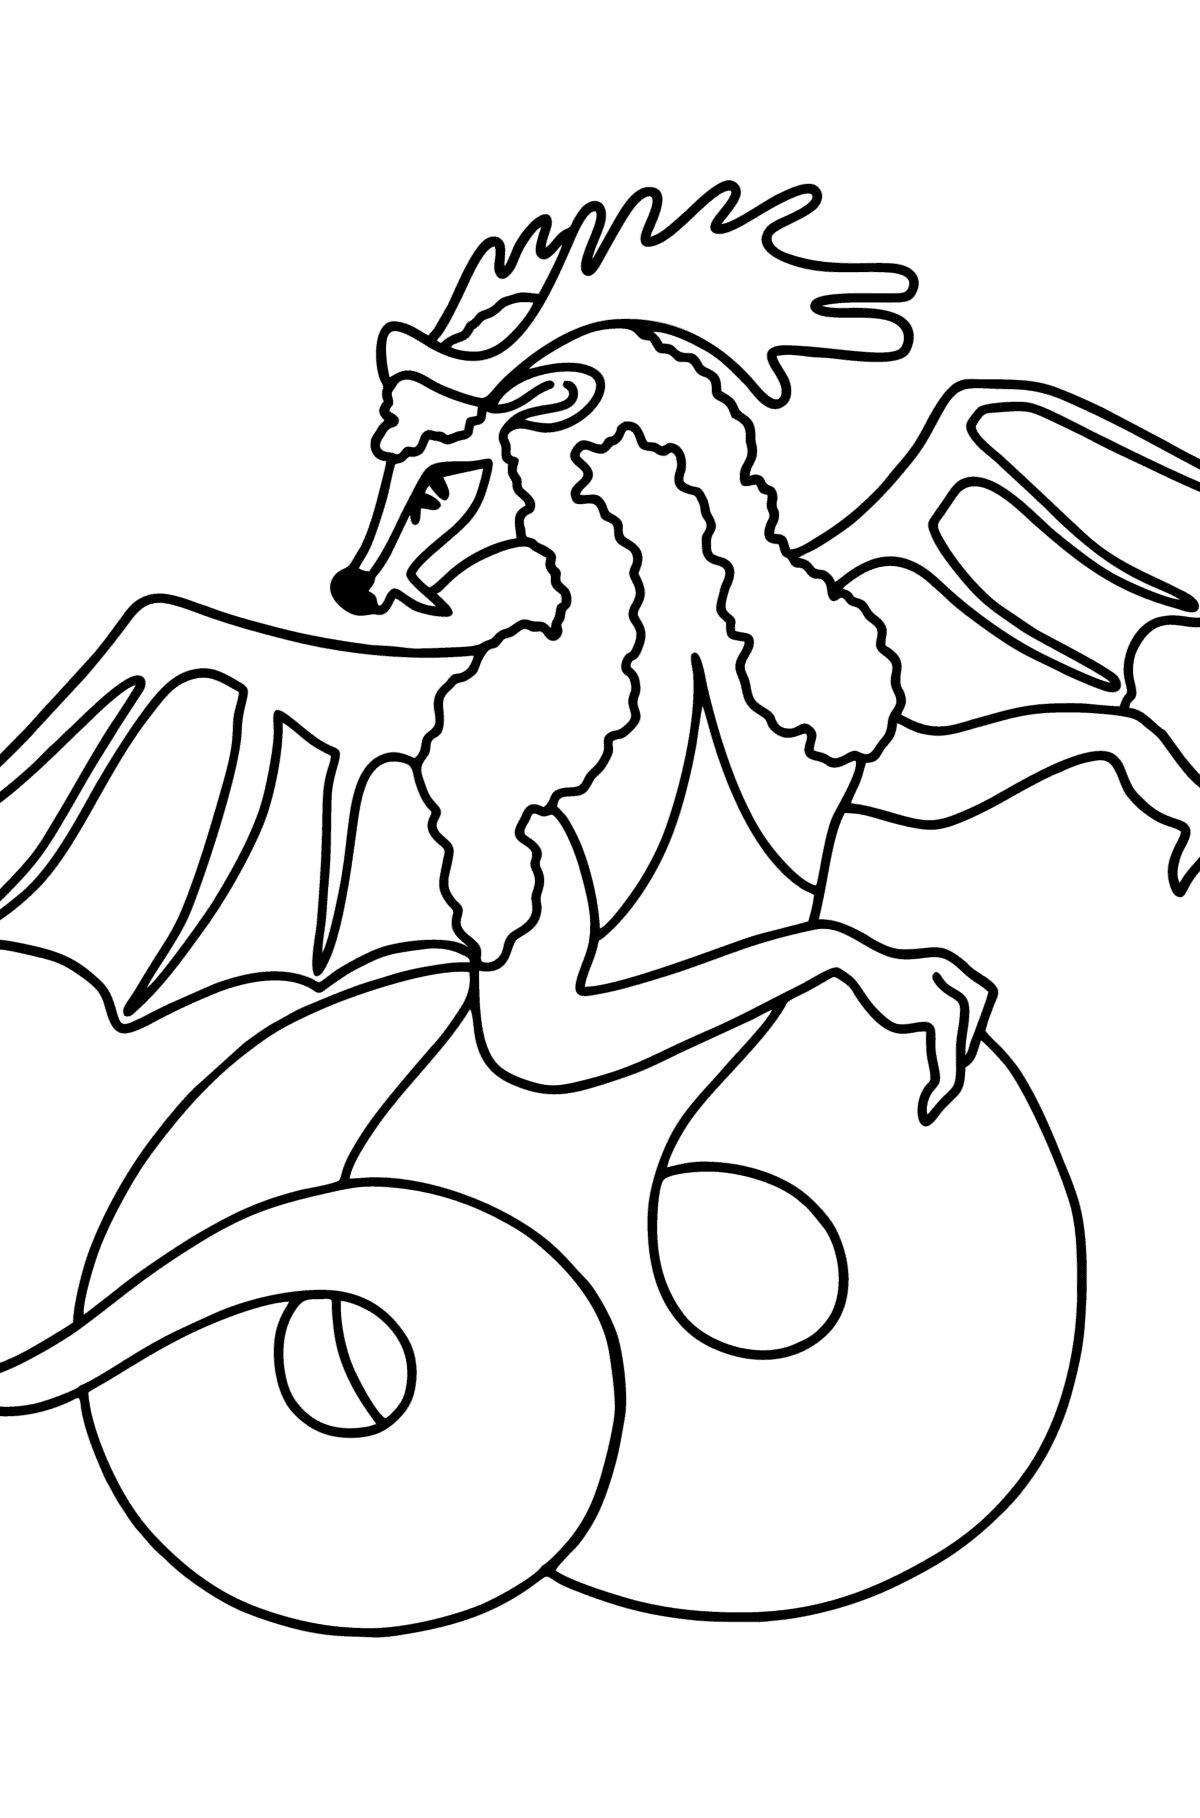 Beautiful Dragon coloring page - Coloring Pages for Kids